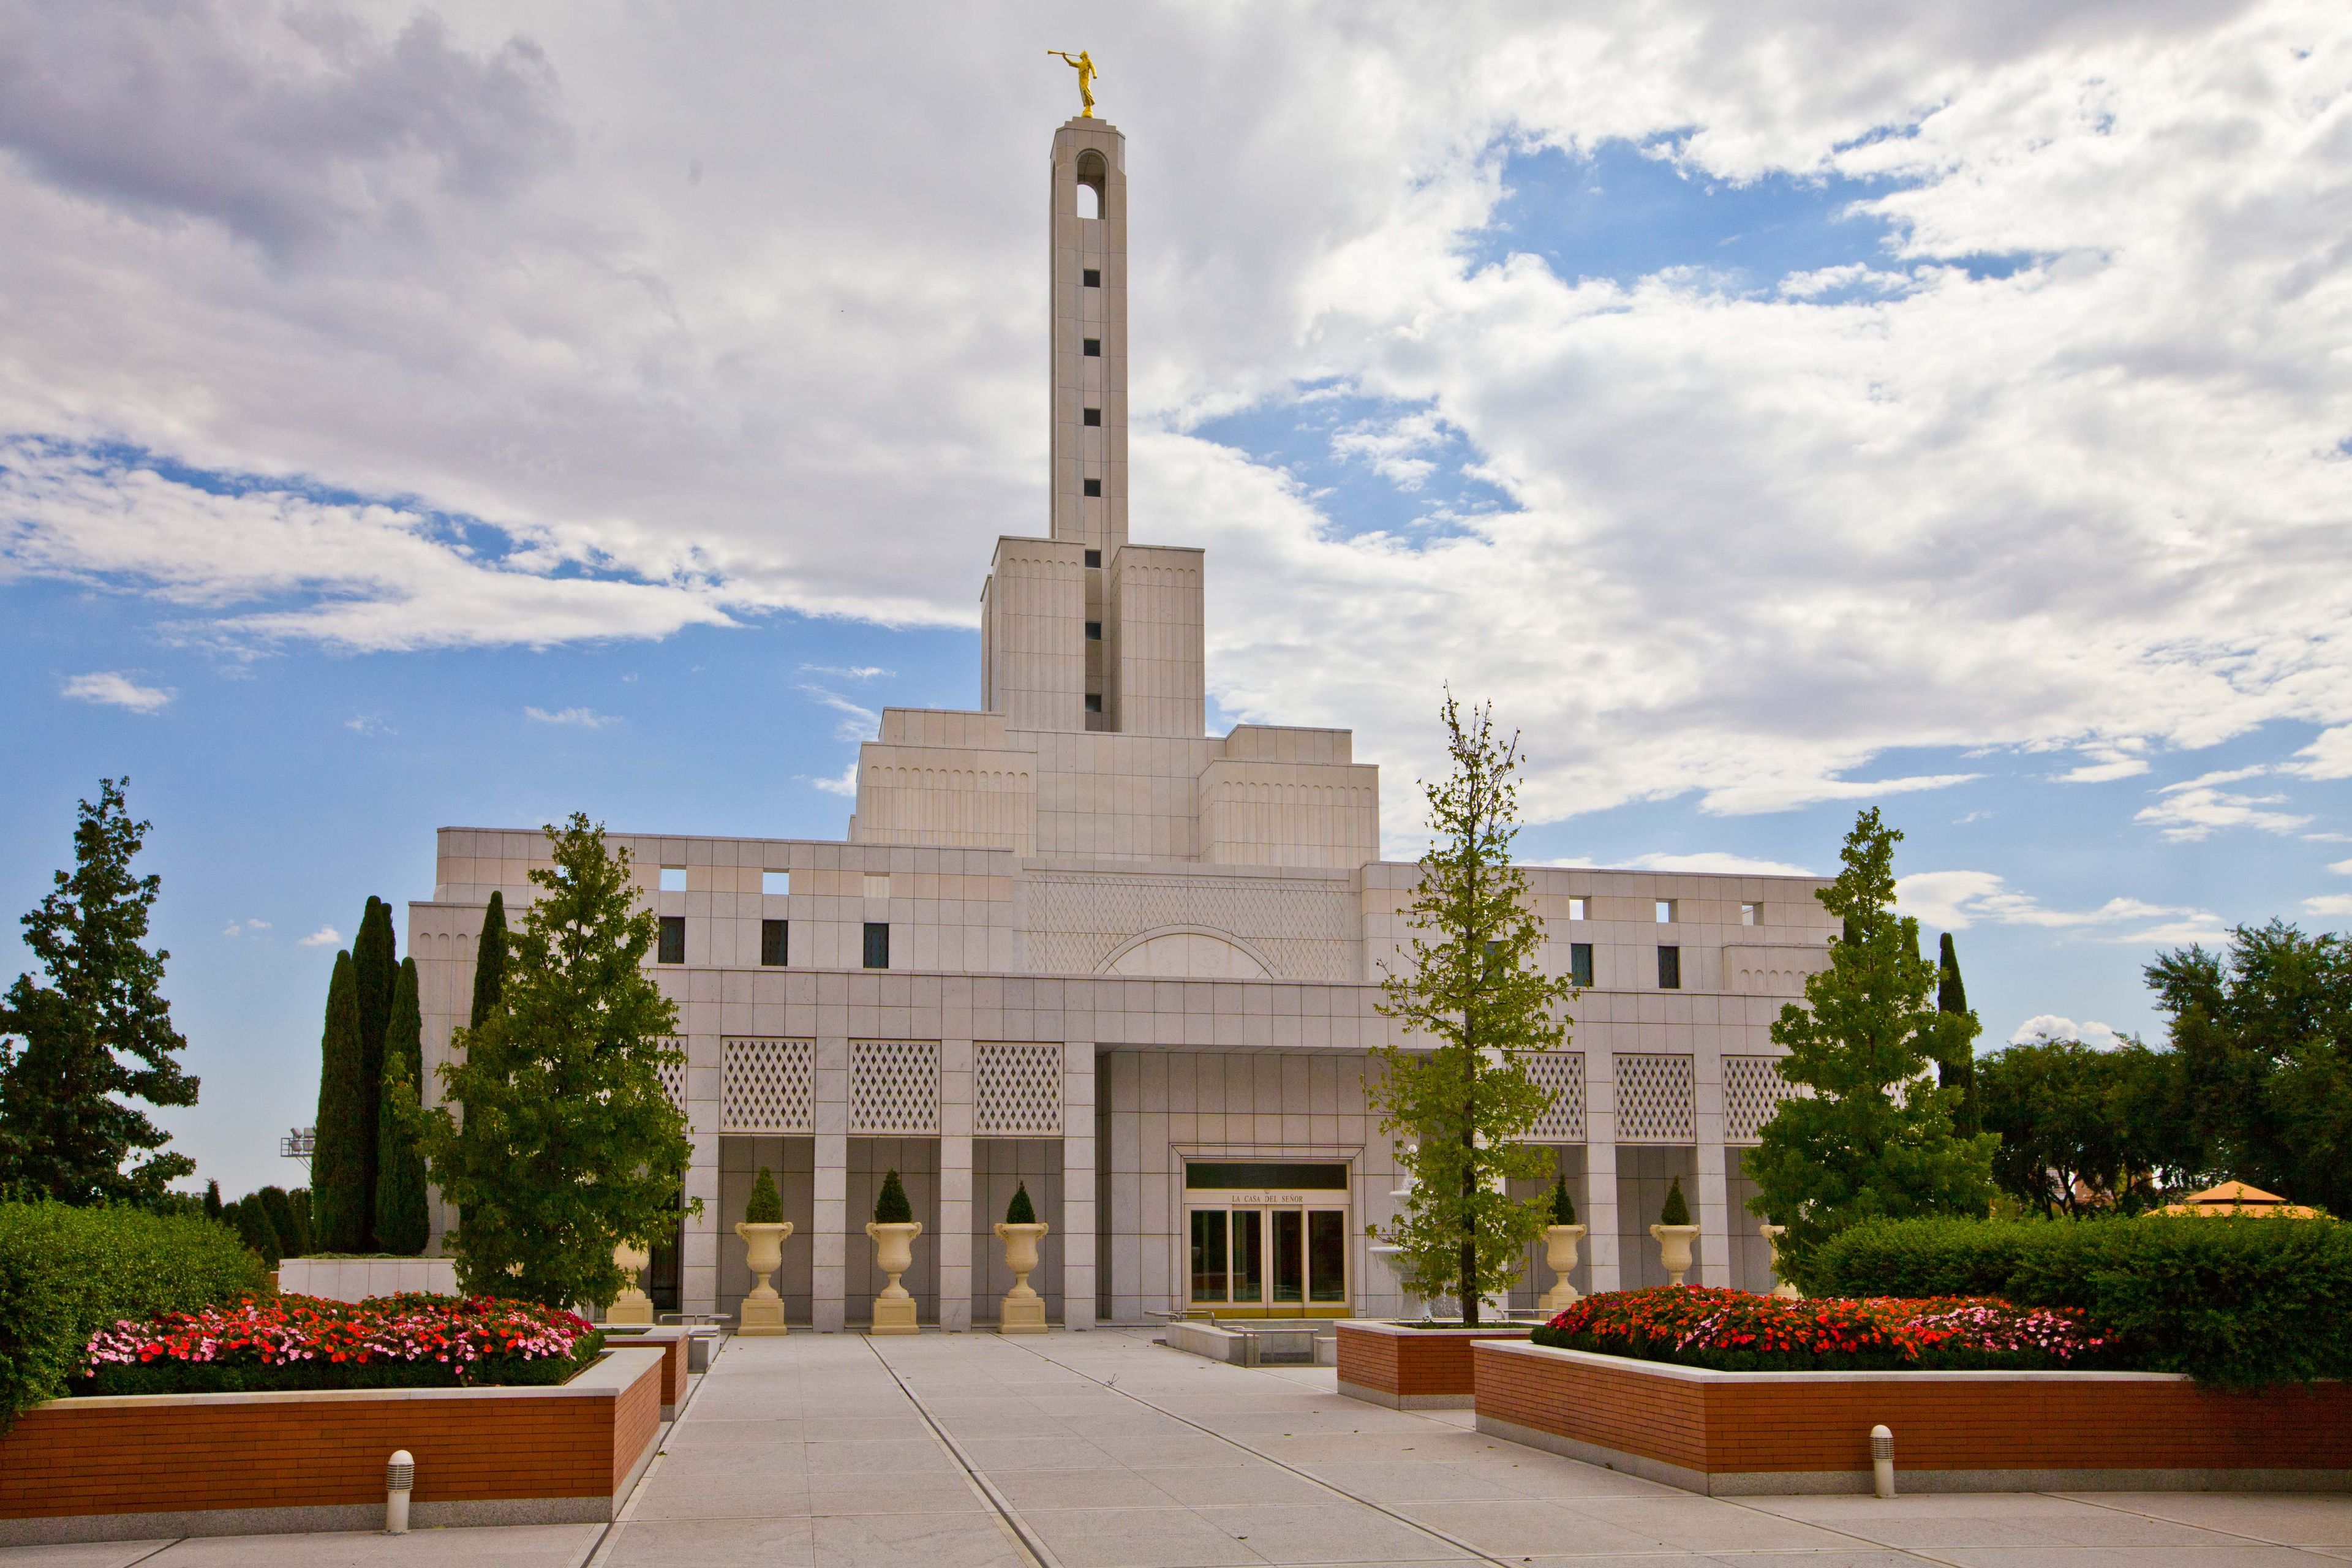 The Madrid Spain Temple entrance, including scenery.